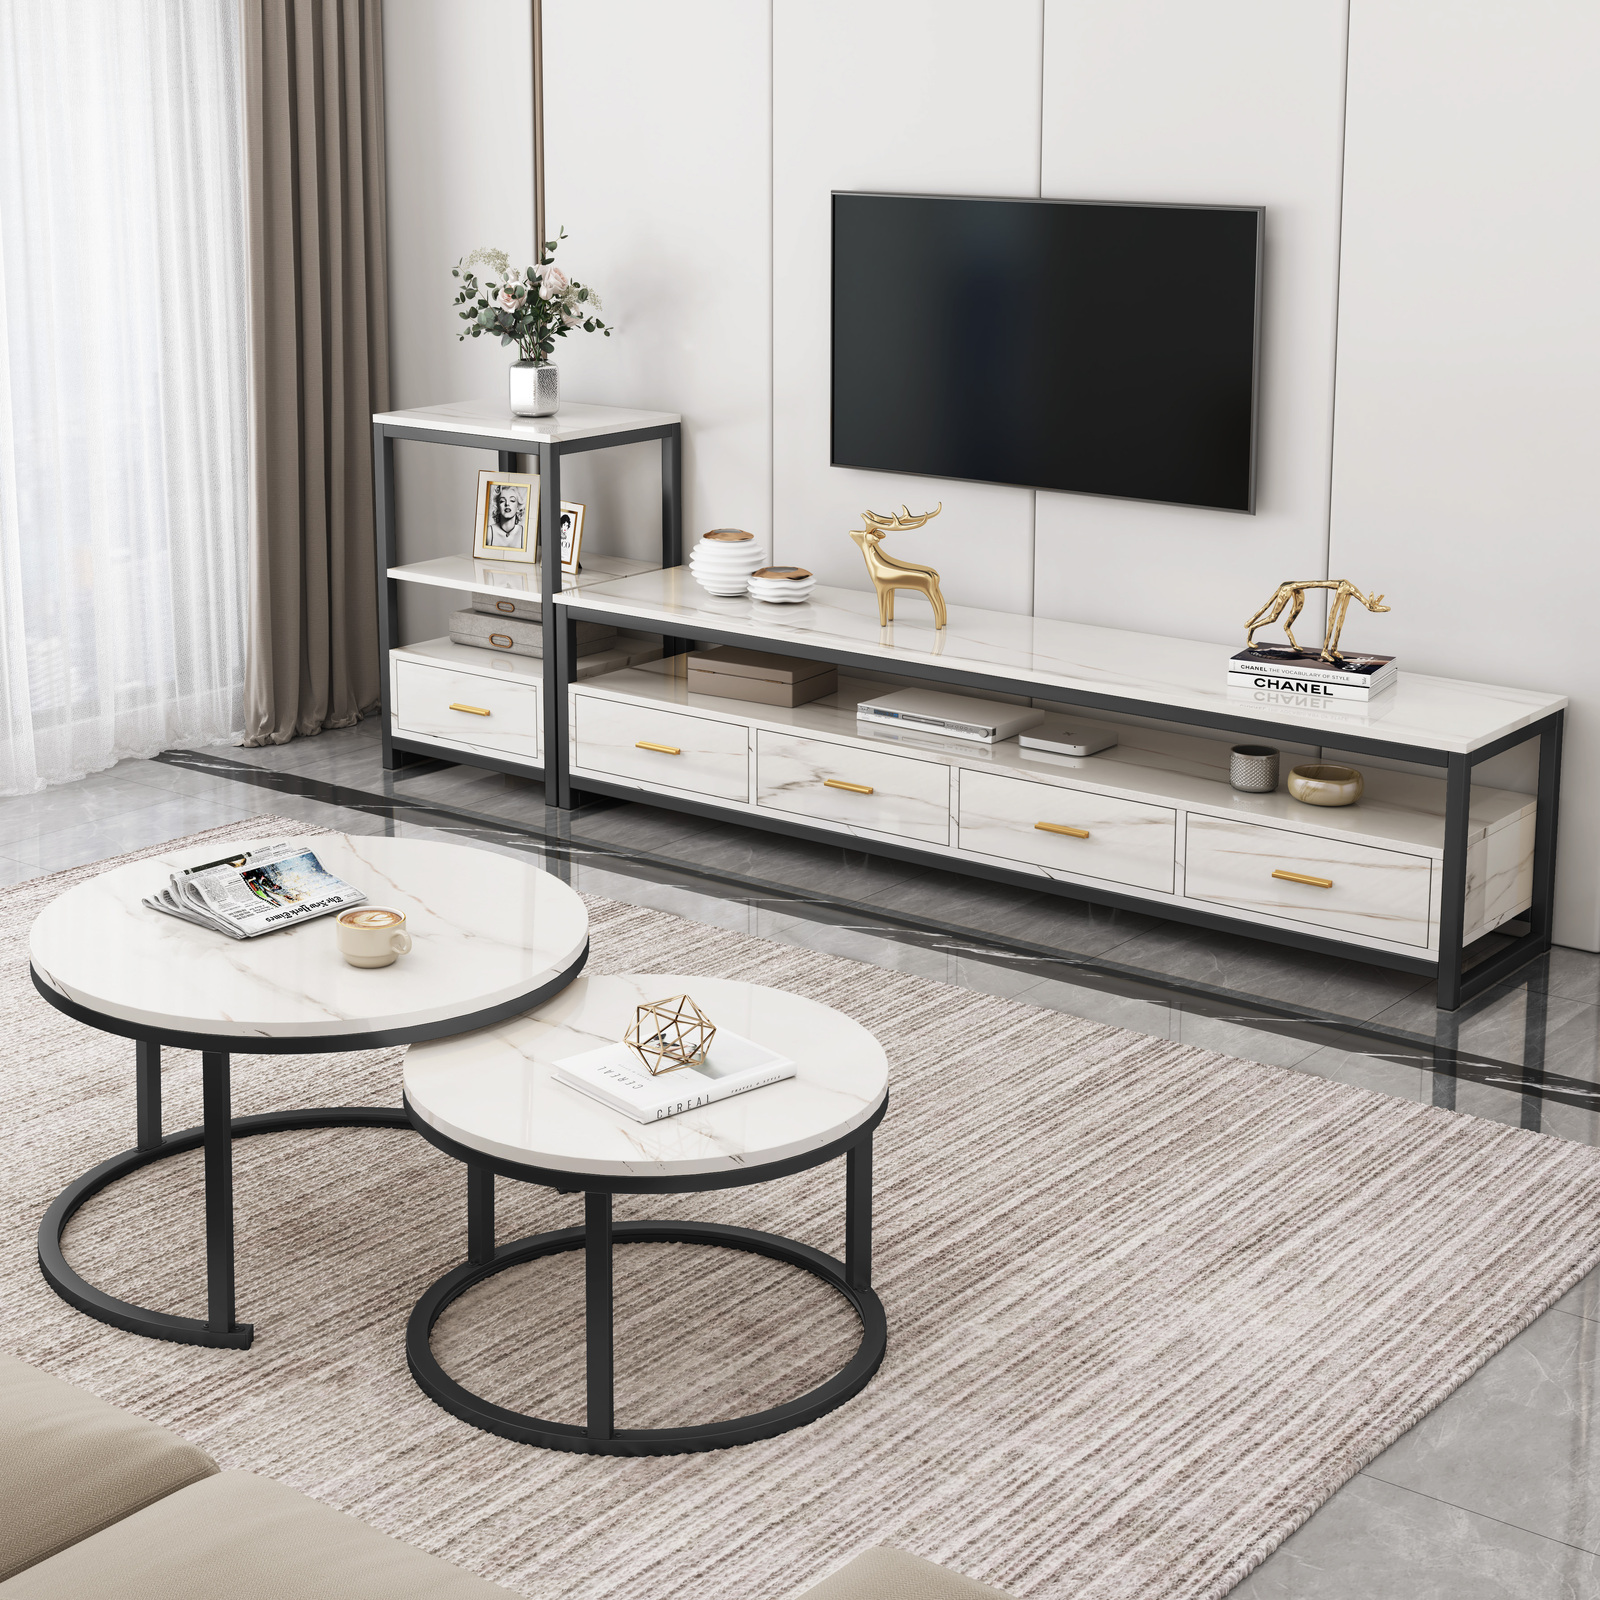 3-Piece Set Synergy Luxury Marble Look Coffee Table, TV Cabinet & Side Table (White)